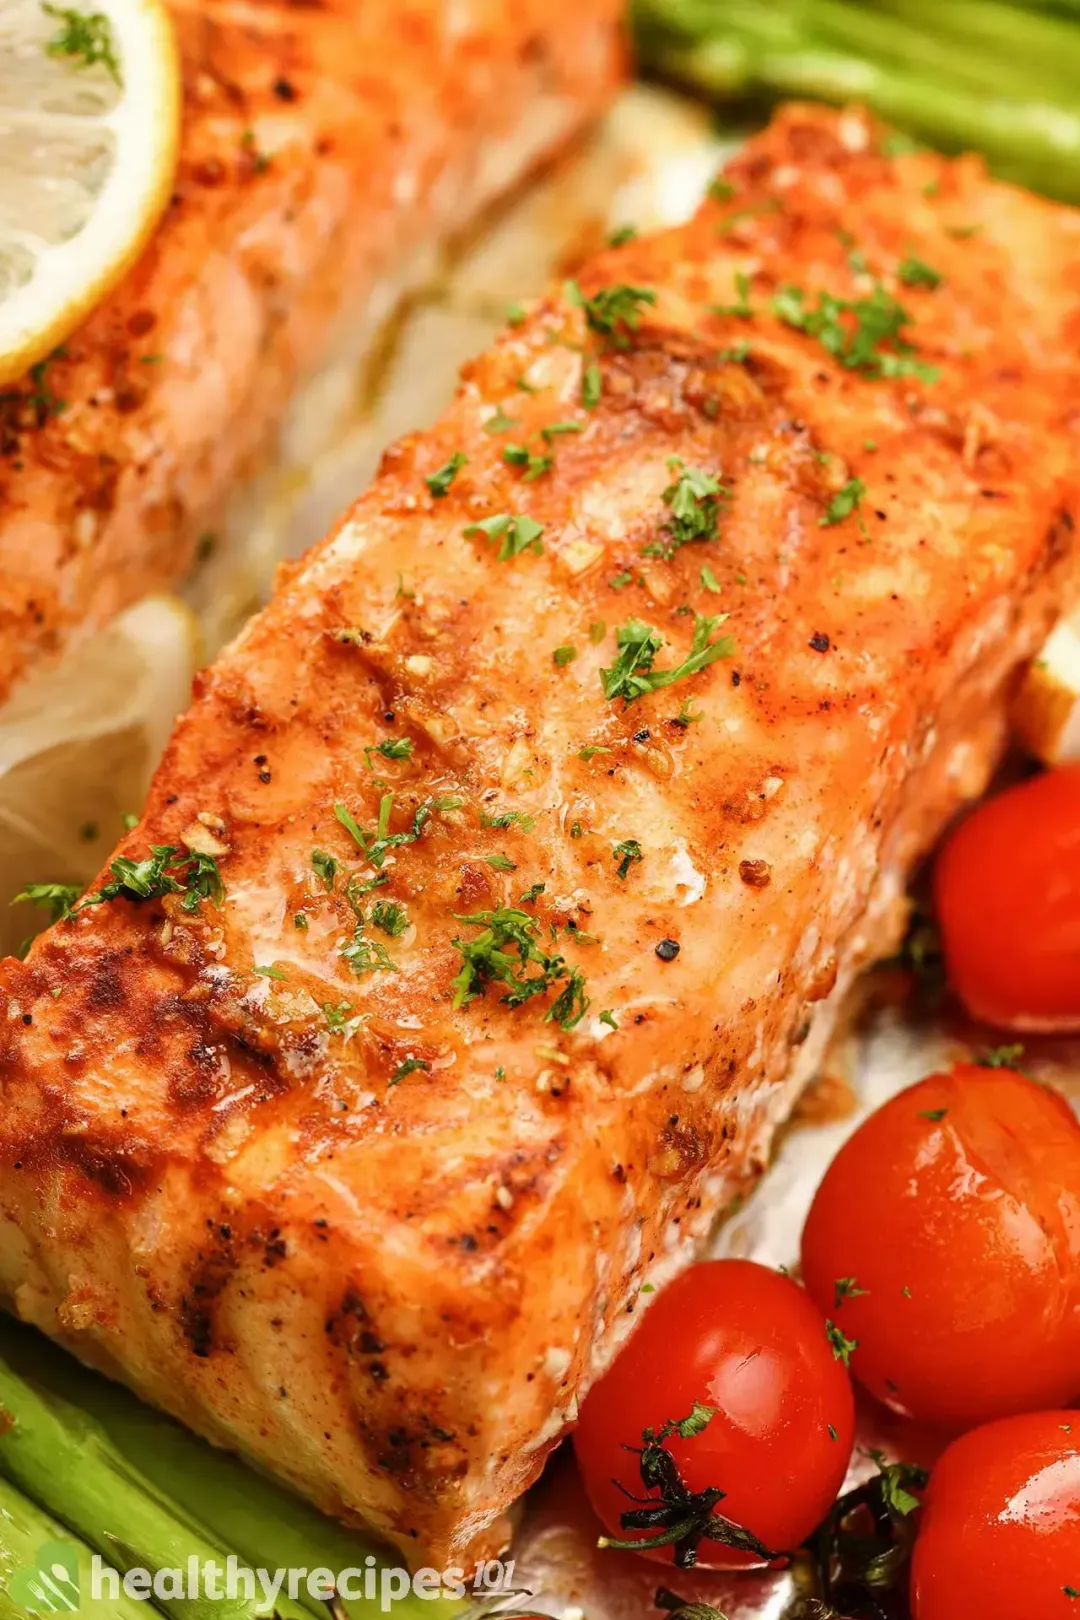 Lemon Butter Salmon Recipe: An Easy Meal With Salmon and Vegetables